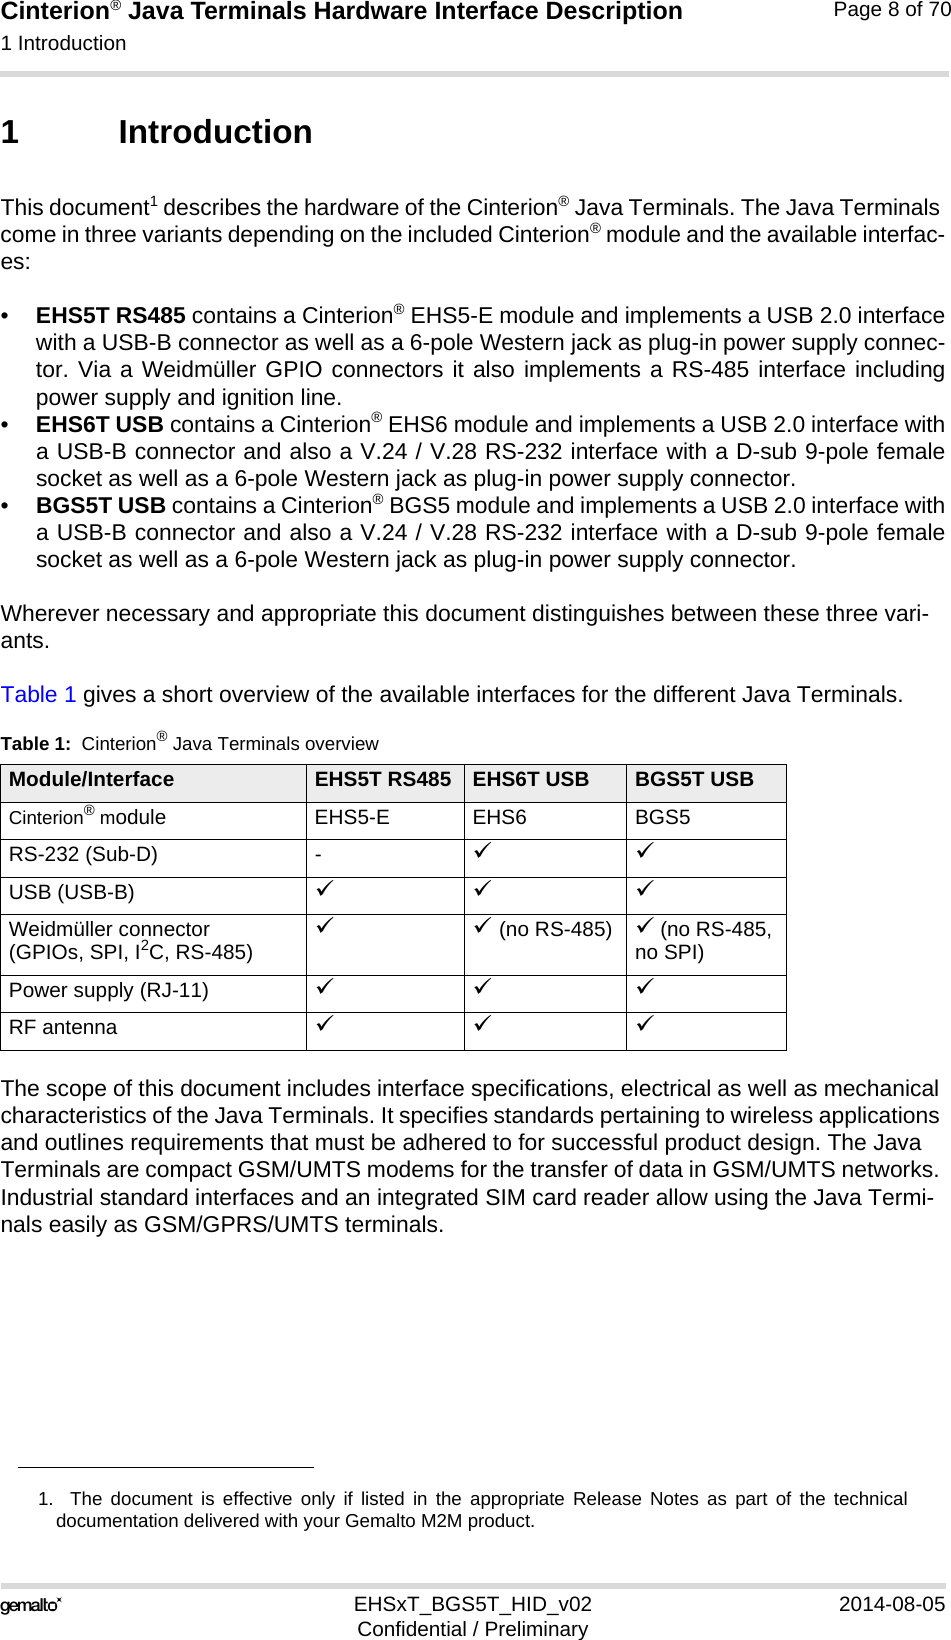 Cinterion® Java Terminals Hardware Interface Description1 Introduction16EHSxT_BGS5T_HID_v02 2014-08-05Confidential / PreliminaryPage 8 of 701 IntroductionThis document1 describes the hardware of the Cinterion® Java Terminals. The Java Terminals come in three variants depending on the included Cinterion® module and the available interfac-es:•EHS5T RS485 contains a Cinterion® EHS5-E module and implements a USB 2.0 interfacewith a USB-B connector as well as a 6-pole Western jack as plug-in power supply connec-tor. Via a Weidmüller GPIO connectors it also implements a RS-485 interface includingpower supply and ignition line.•EHS6T USB contains a Cinterion® EHS6 module and implements a USB 2.0 interface witha USB-B connector and also a V.24 / V.28 RS-232 interface with a D-sub 9-pole femalesocket as well as a 6-pole Western jack as plug-in power supply connector.•BGS5T USB contains a Cinterion® BGS5 module and implements a USB 2.0 interface witha USB-B connector and also a V.24 / V.28 RS-232 interface with a D-sub 9-pole femalesocket as well as a 6-pole Western jack as plug-in power supply connector. Wherever necessary and appropriate this document distinguishes between these three vari-ants.Table 1 gives a short overview of the available interfaces for the different Java Terminals.The scope of this document includes interface specifications, electrical as well as mechanical characteristics of the Java Terminals. It specifies standards pertaining to wireless applications and outlines requirements that must be adhered to for successful product design. The Java Terminals are compact GSM/UMTS modems for the transfer of data in GSM/UMTS networks. Industrial standard interfaces and an integrated SIM card reader allow using the Java Termi-nals easily as GSM/GPRS/UMTS terminals. 1.  The document is effective only if listed in the appropriate Release Notes as part of the technicaldocumentation delivered with your Gemalto M2M product.Table 1:  Cinterion® Java Terminals overviewModule/Interface EHS5T RS485 EHS6T USB BGS5T USBCinterion® module EHS5-E EHS6 BGS5RS-232 (Sub-D) - USB (USB-B)  Weidmüller connector (GPIOs, SPI, I2C, RS-485) (no RS-485)  (no RS-485, no SPI)Power supply (RJ-11)  RF antenna  